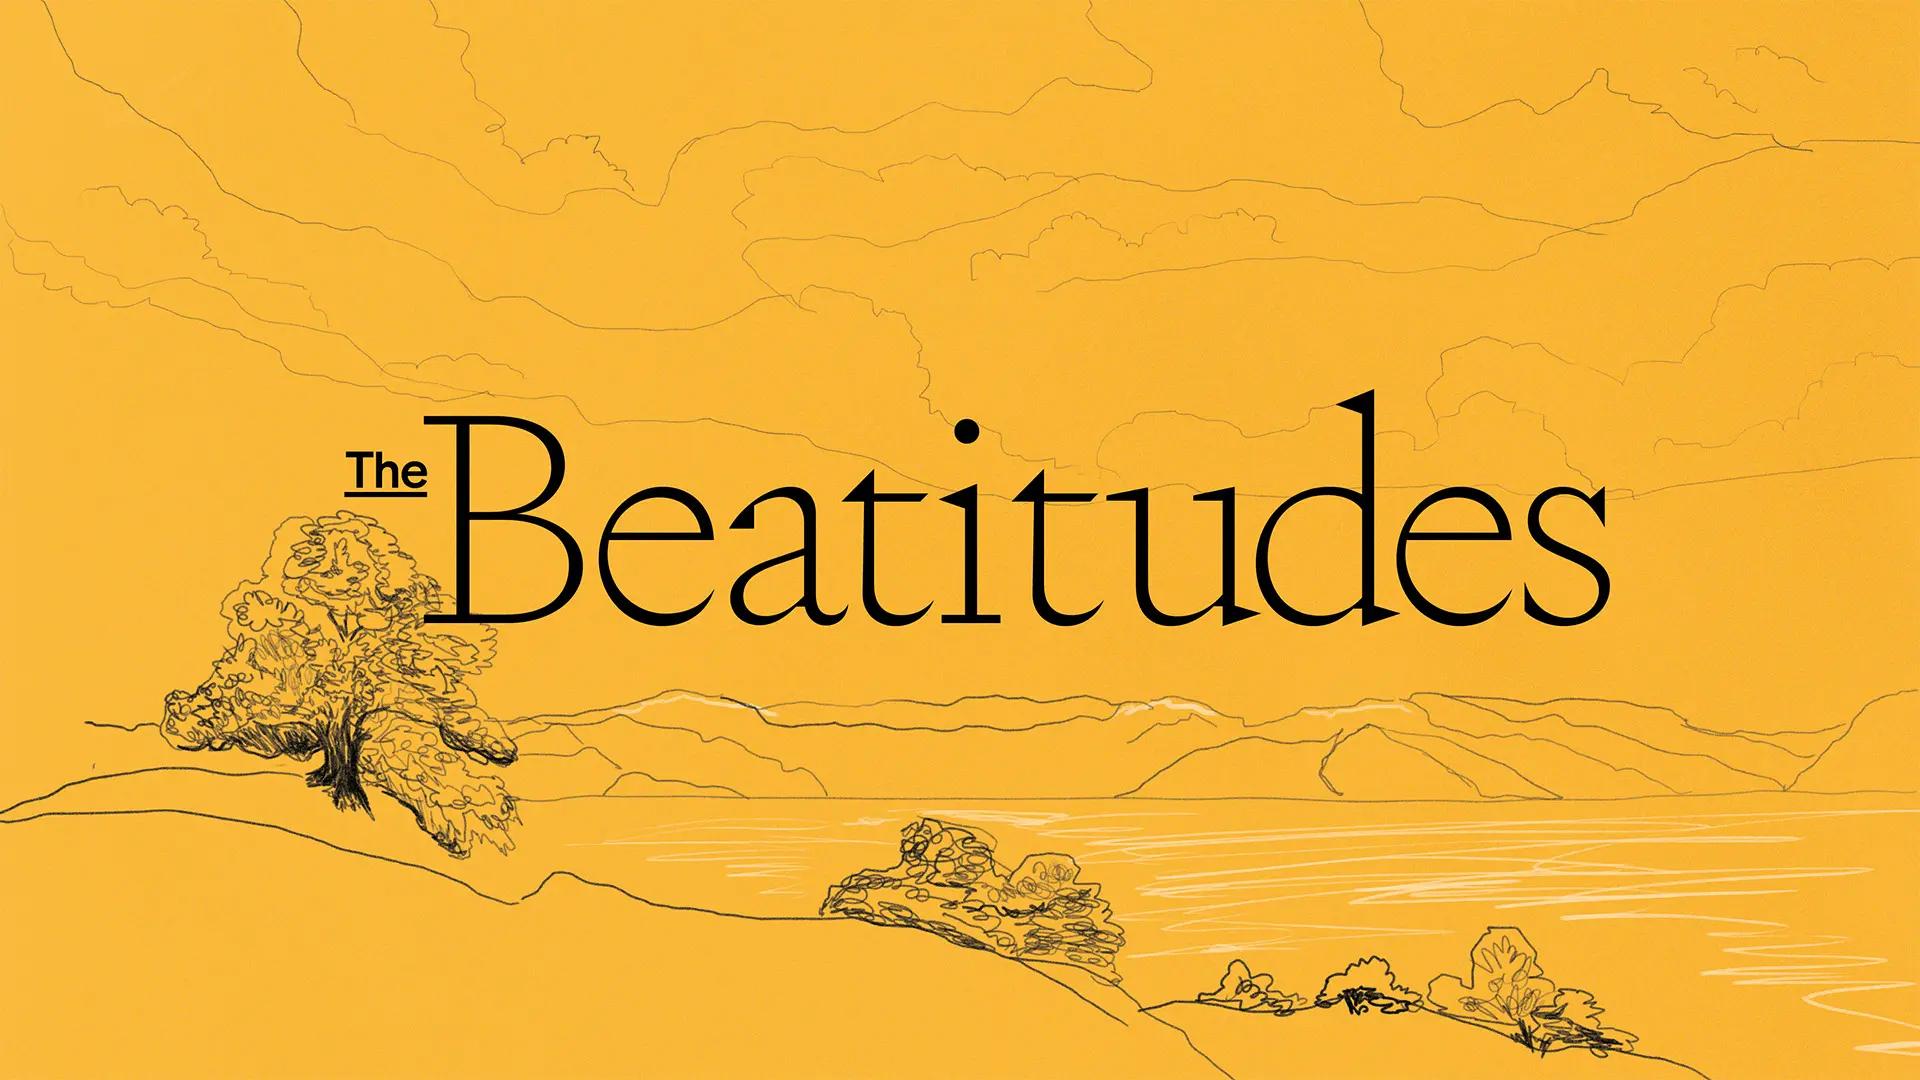 A simple illustration of a mountain with a few trees. "The Beatitudes" is written over it.